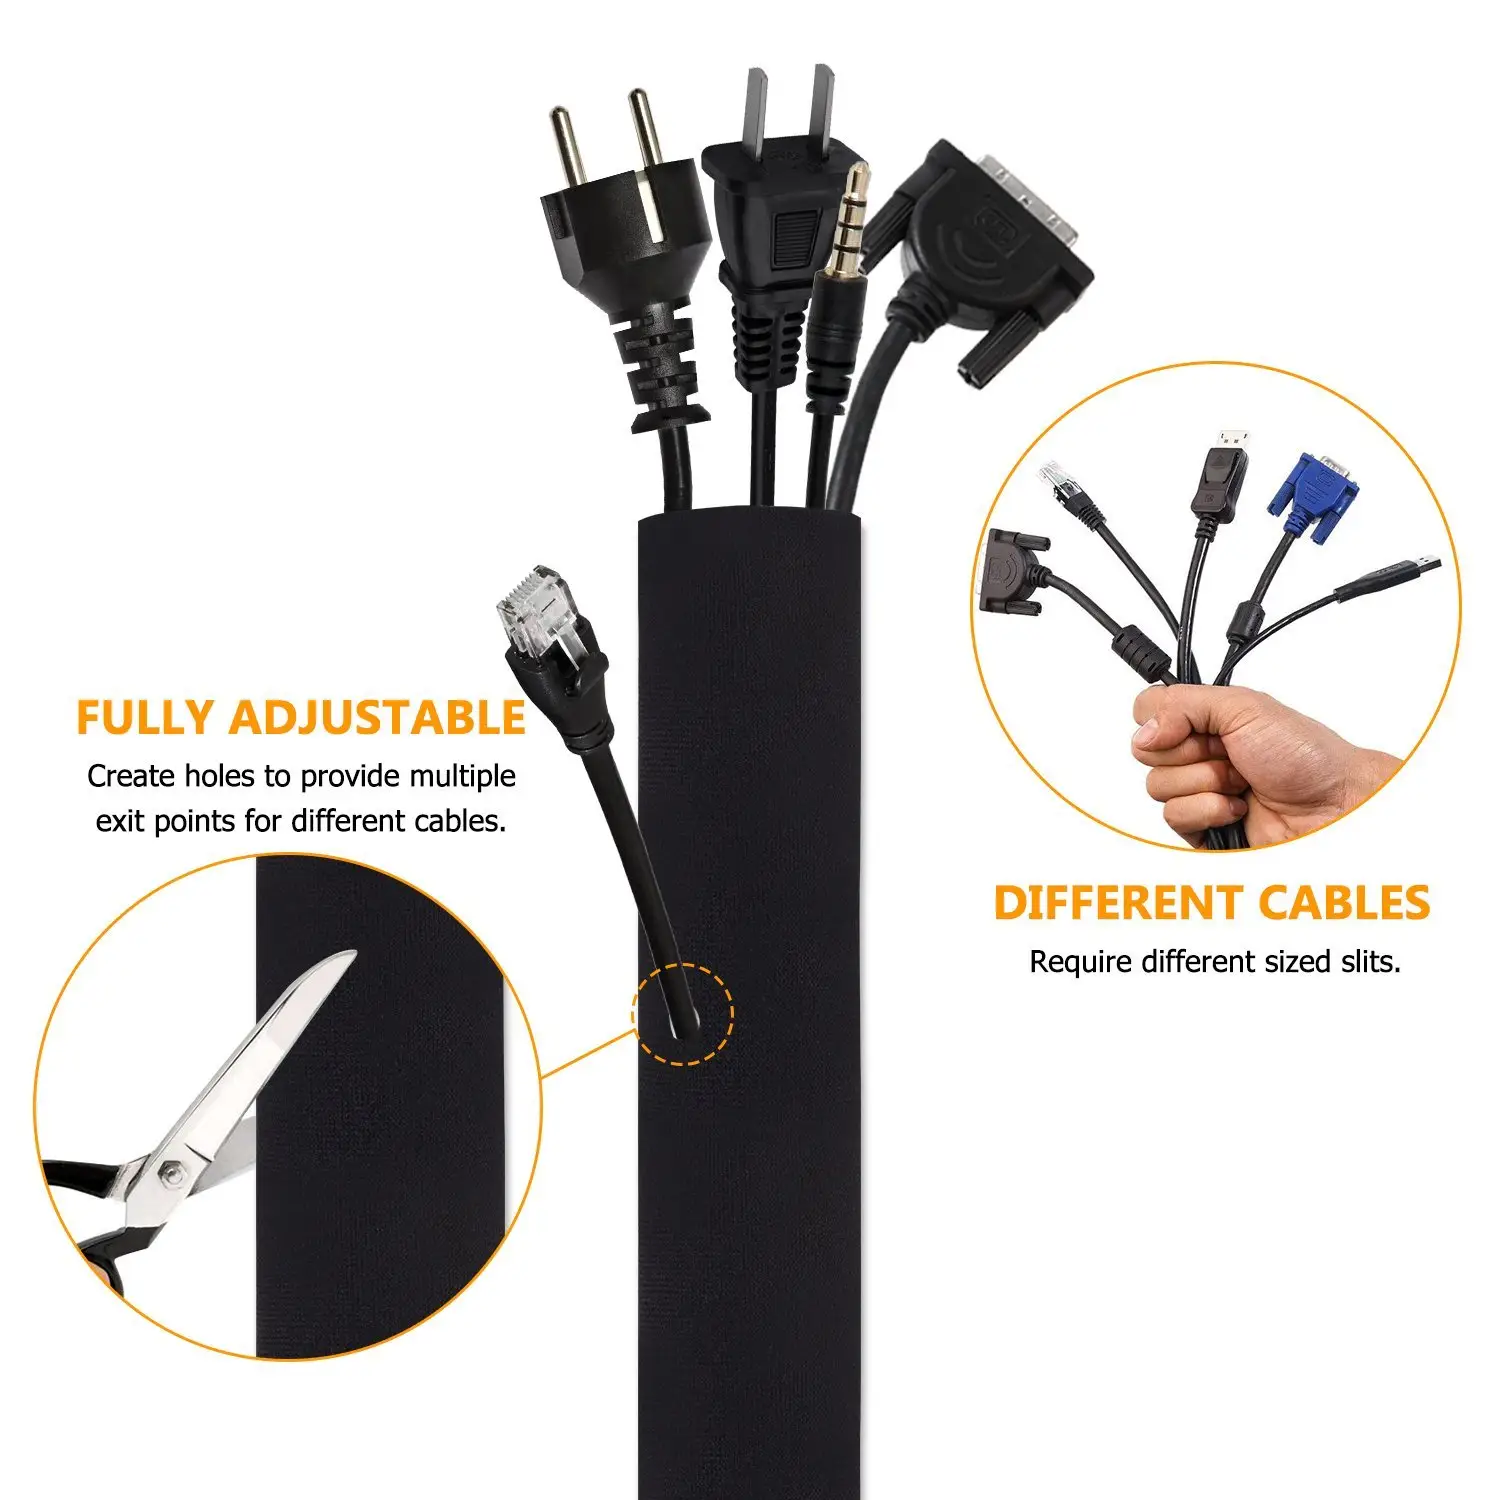 Hot Selling Wholesale Flexible Dustproof Neoprene With Zipper Cable Sleeves Neoprene Cable Wire Management Sleeve